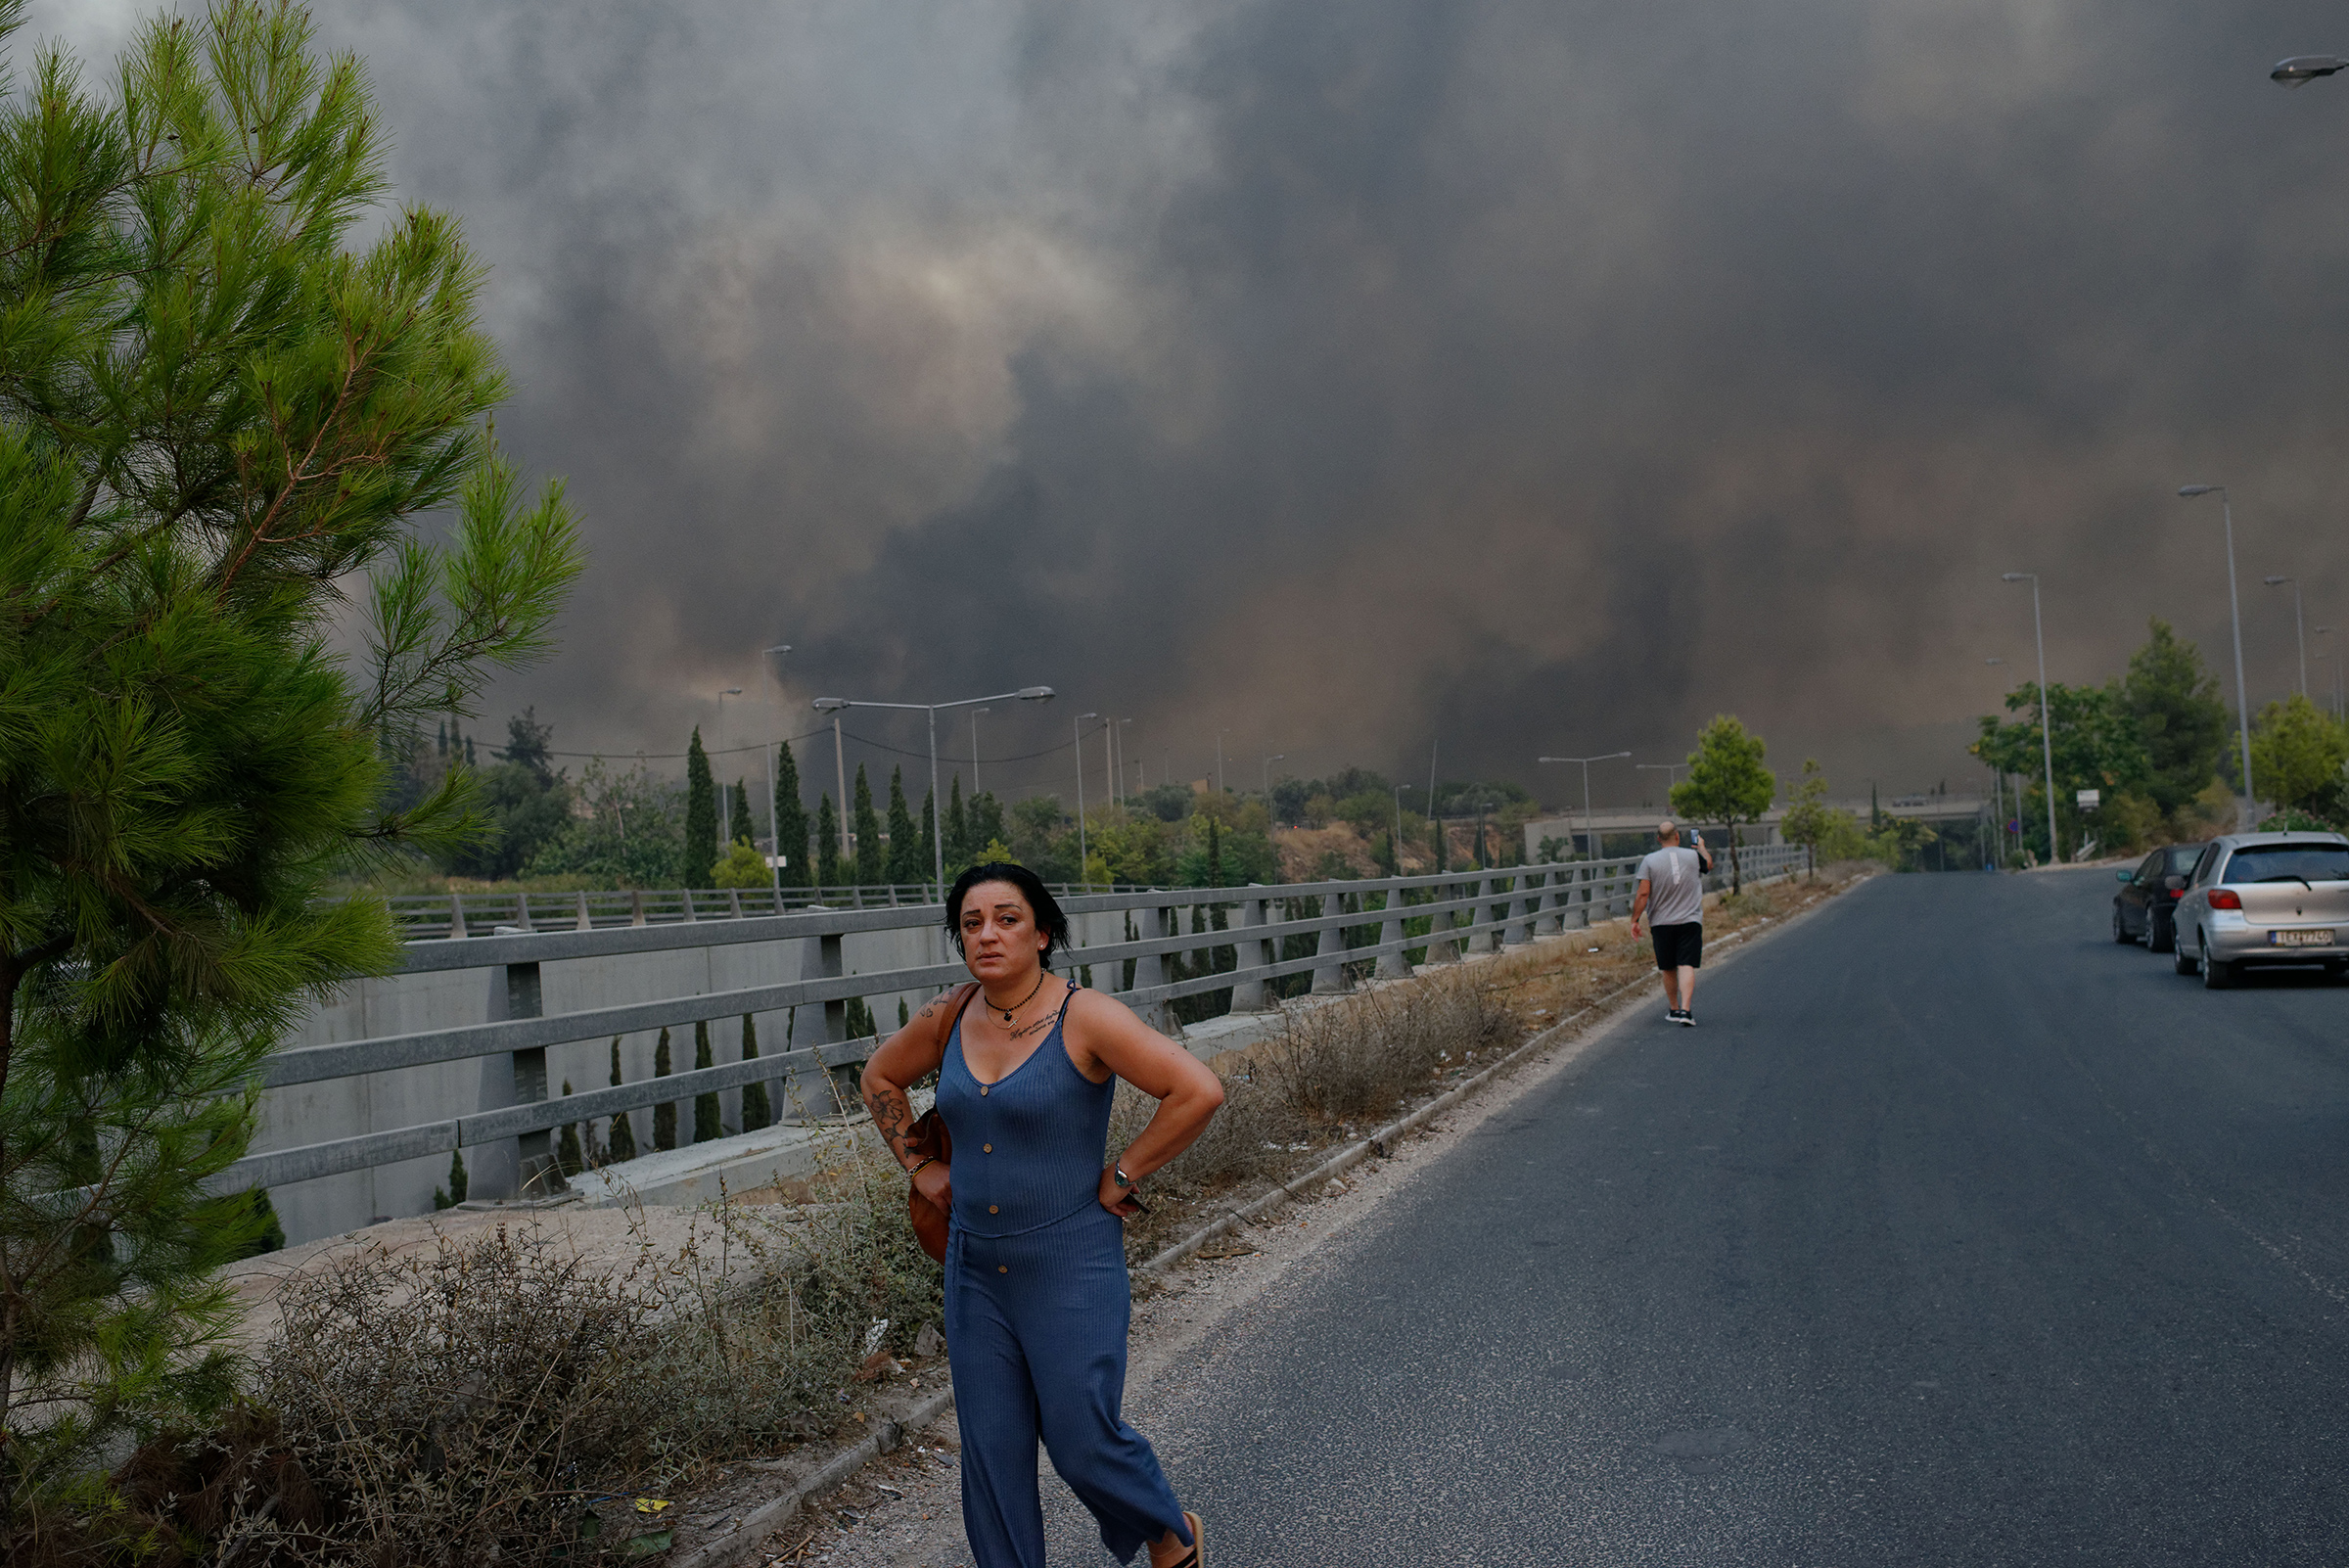 Forest fire rages in Varybobi, north of Athens, Greece on Aug. 3. Residential areas in Athens northern suburbs were evacuated as wildfires reached the outskirts of the city. (Gerasimos Koilakos—NurPhoto/Getty Images)